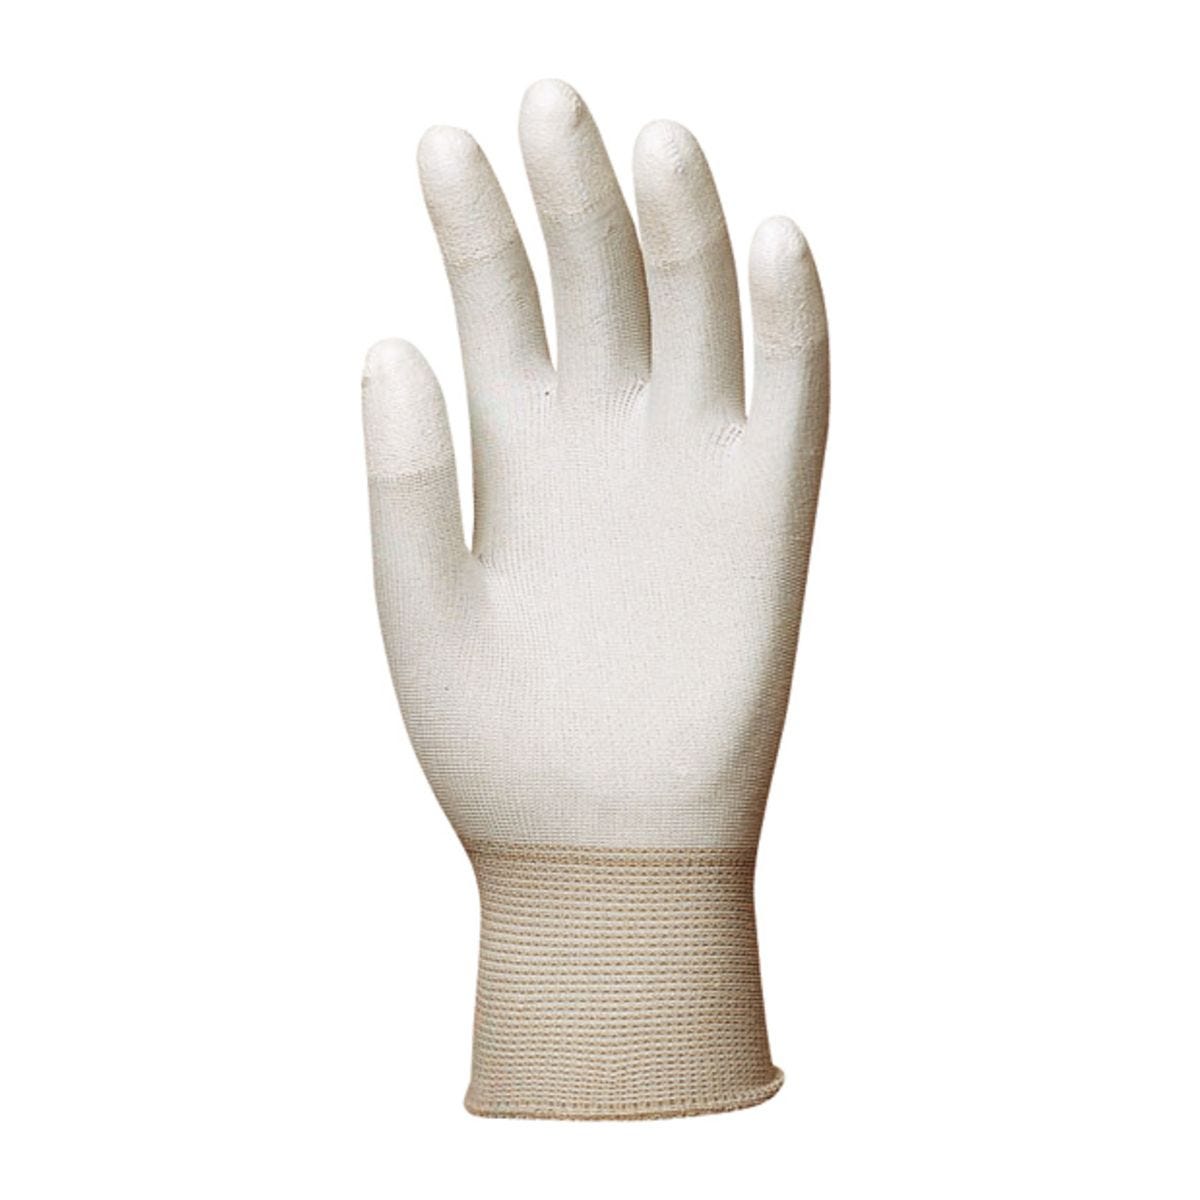 Gants polyester blanc, doigts enduits PU blanc - Coverguard - Taille XS-6 0